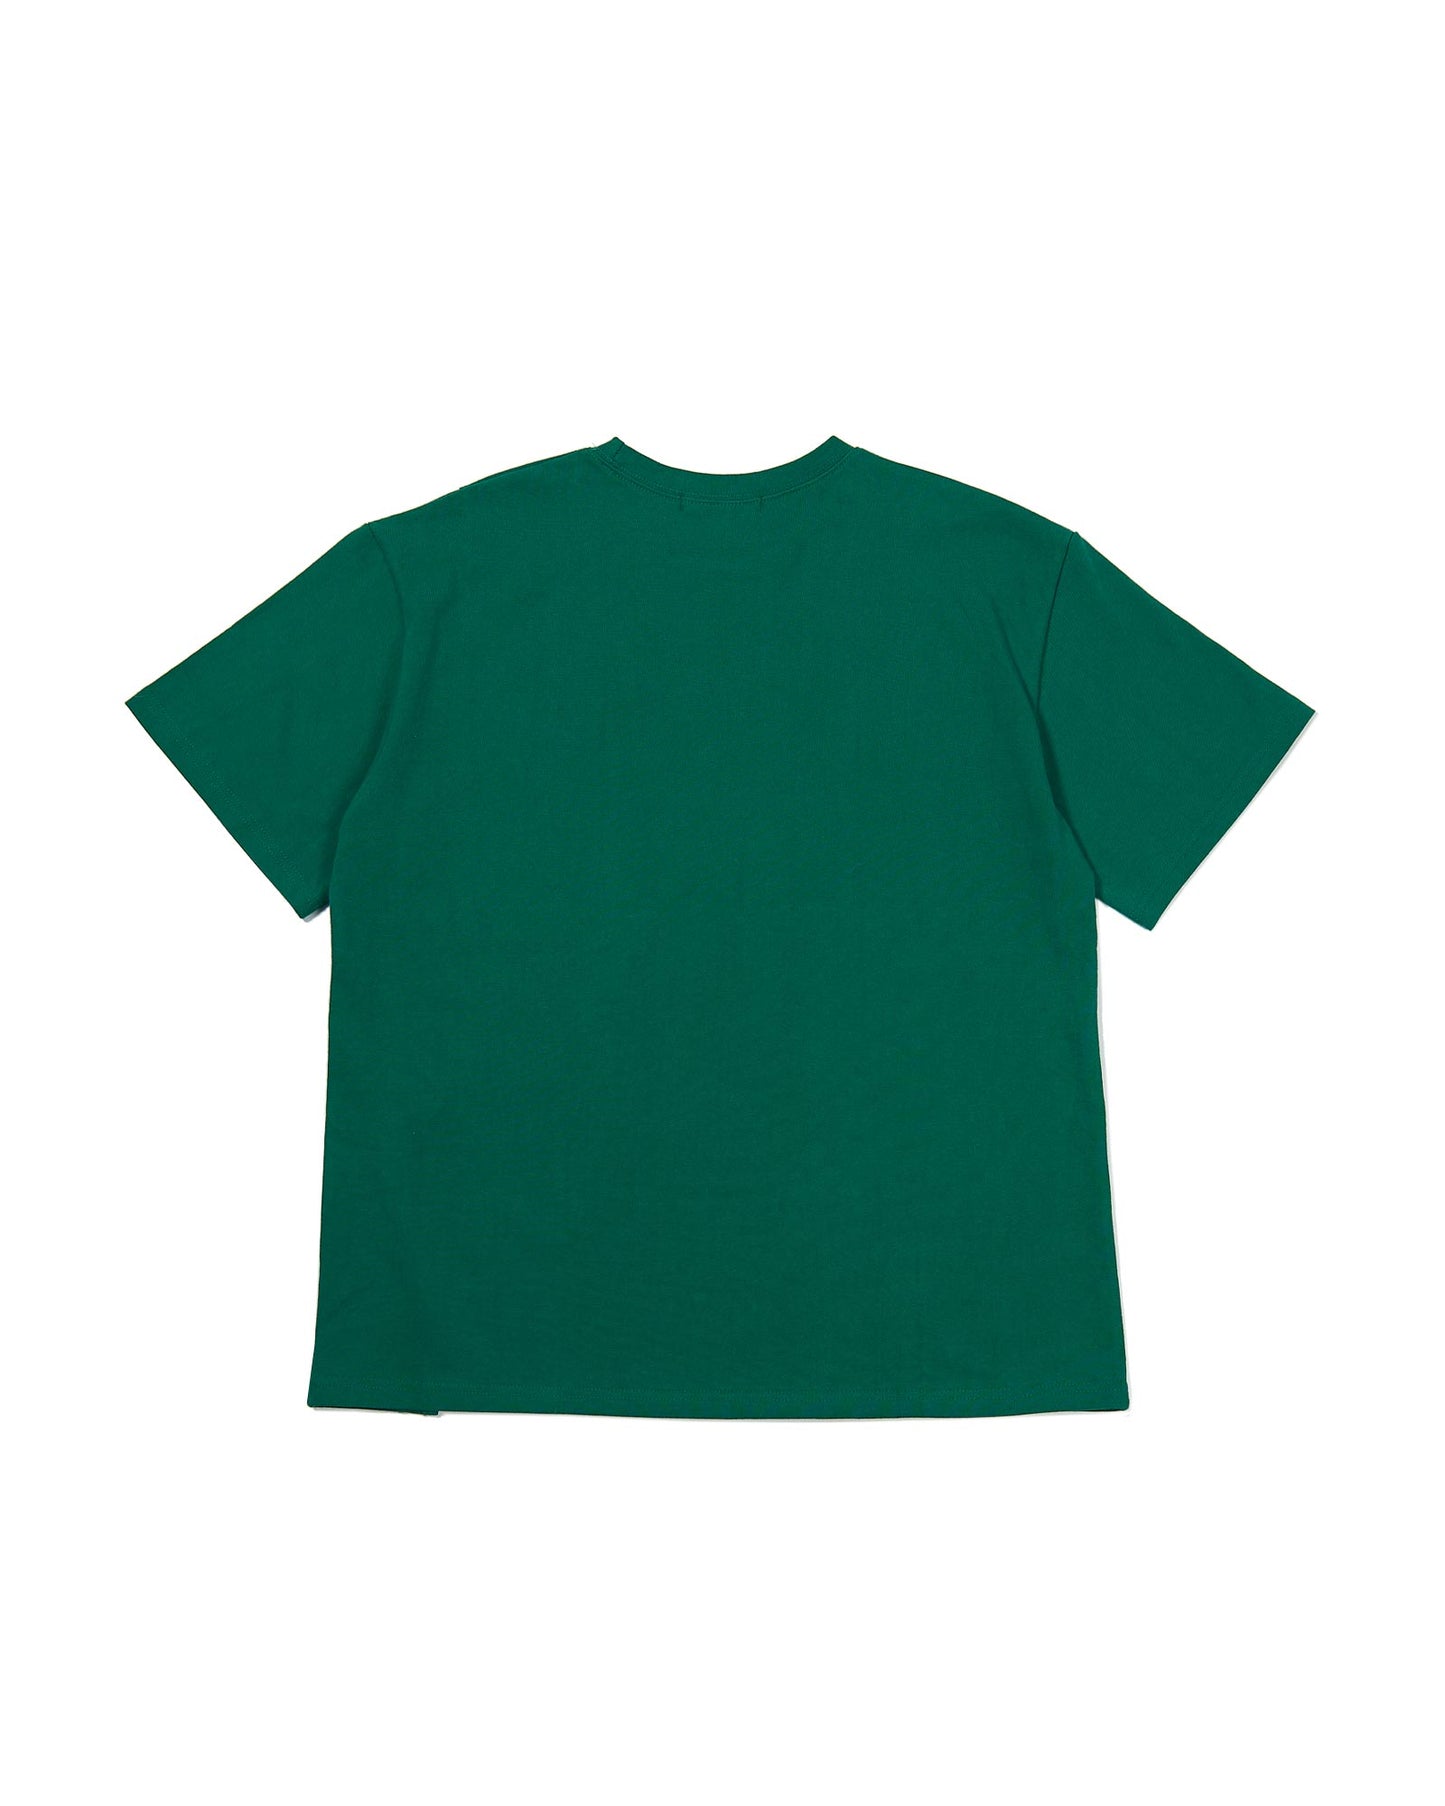 You Are Alive Oversized Tee -  Kelly Green